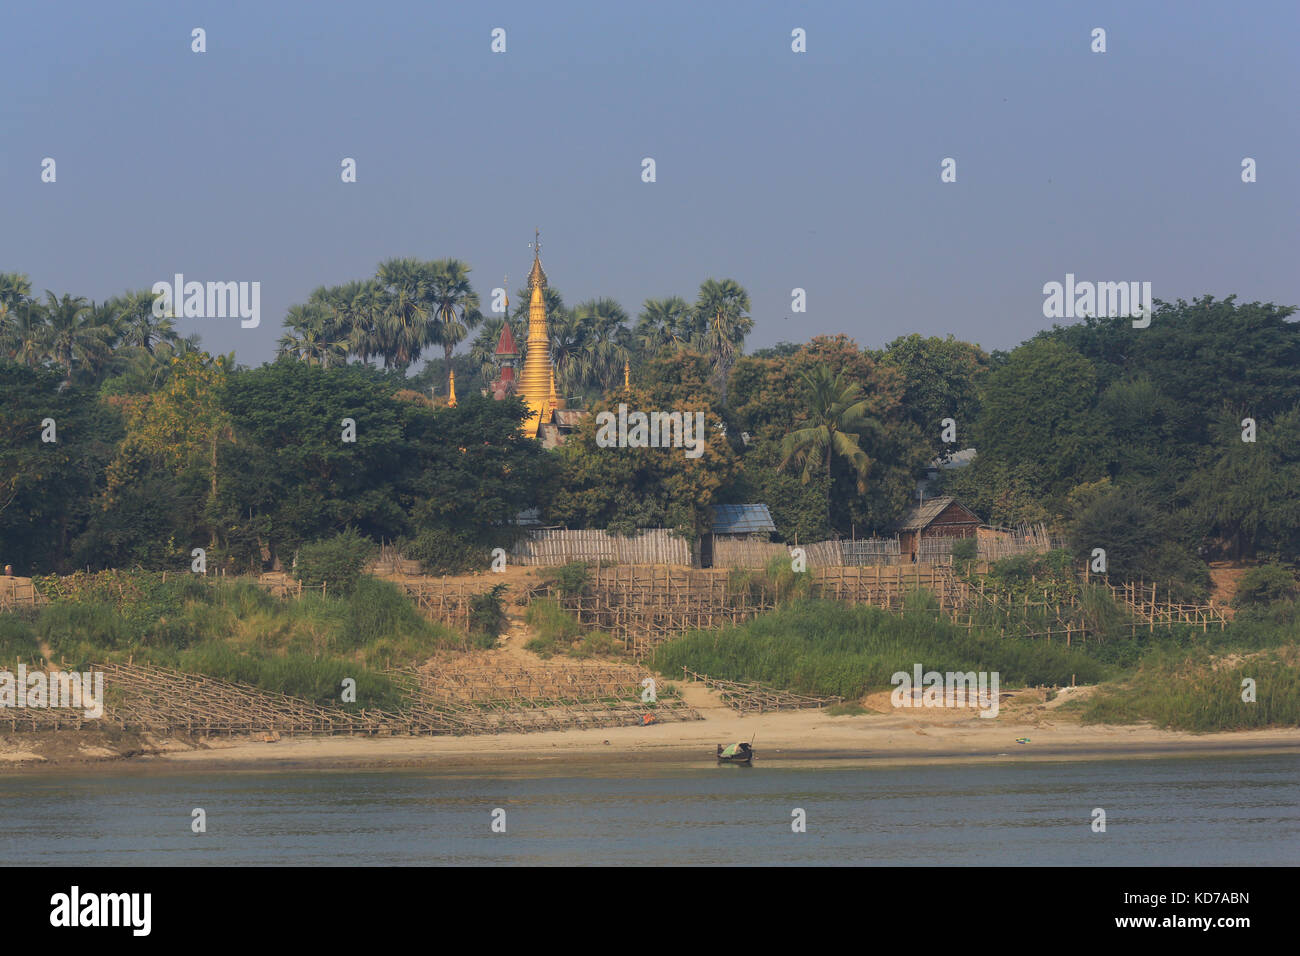 Timber crib bank protection works on an outside bend of the Irrawaddy River in the Mandalay Region of Myanmar (Burma). Stock Photo